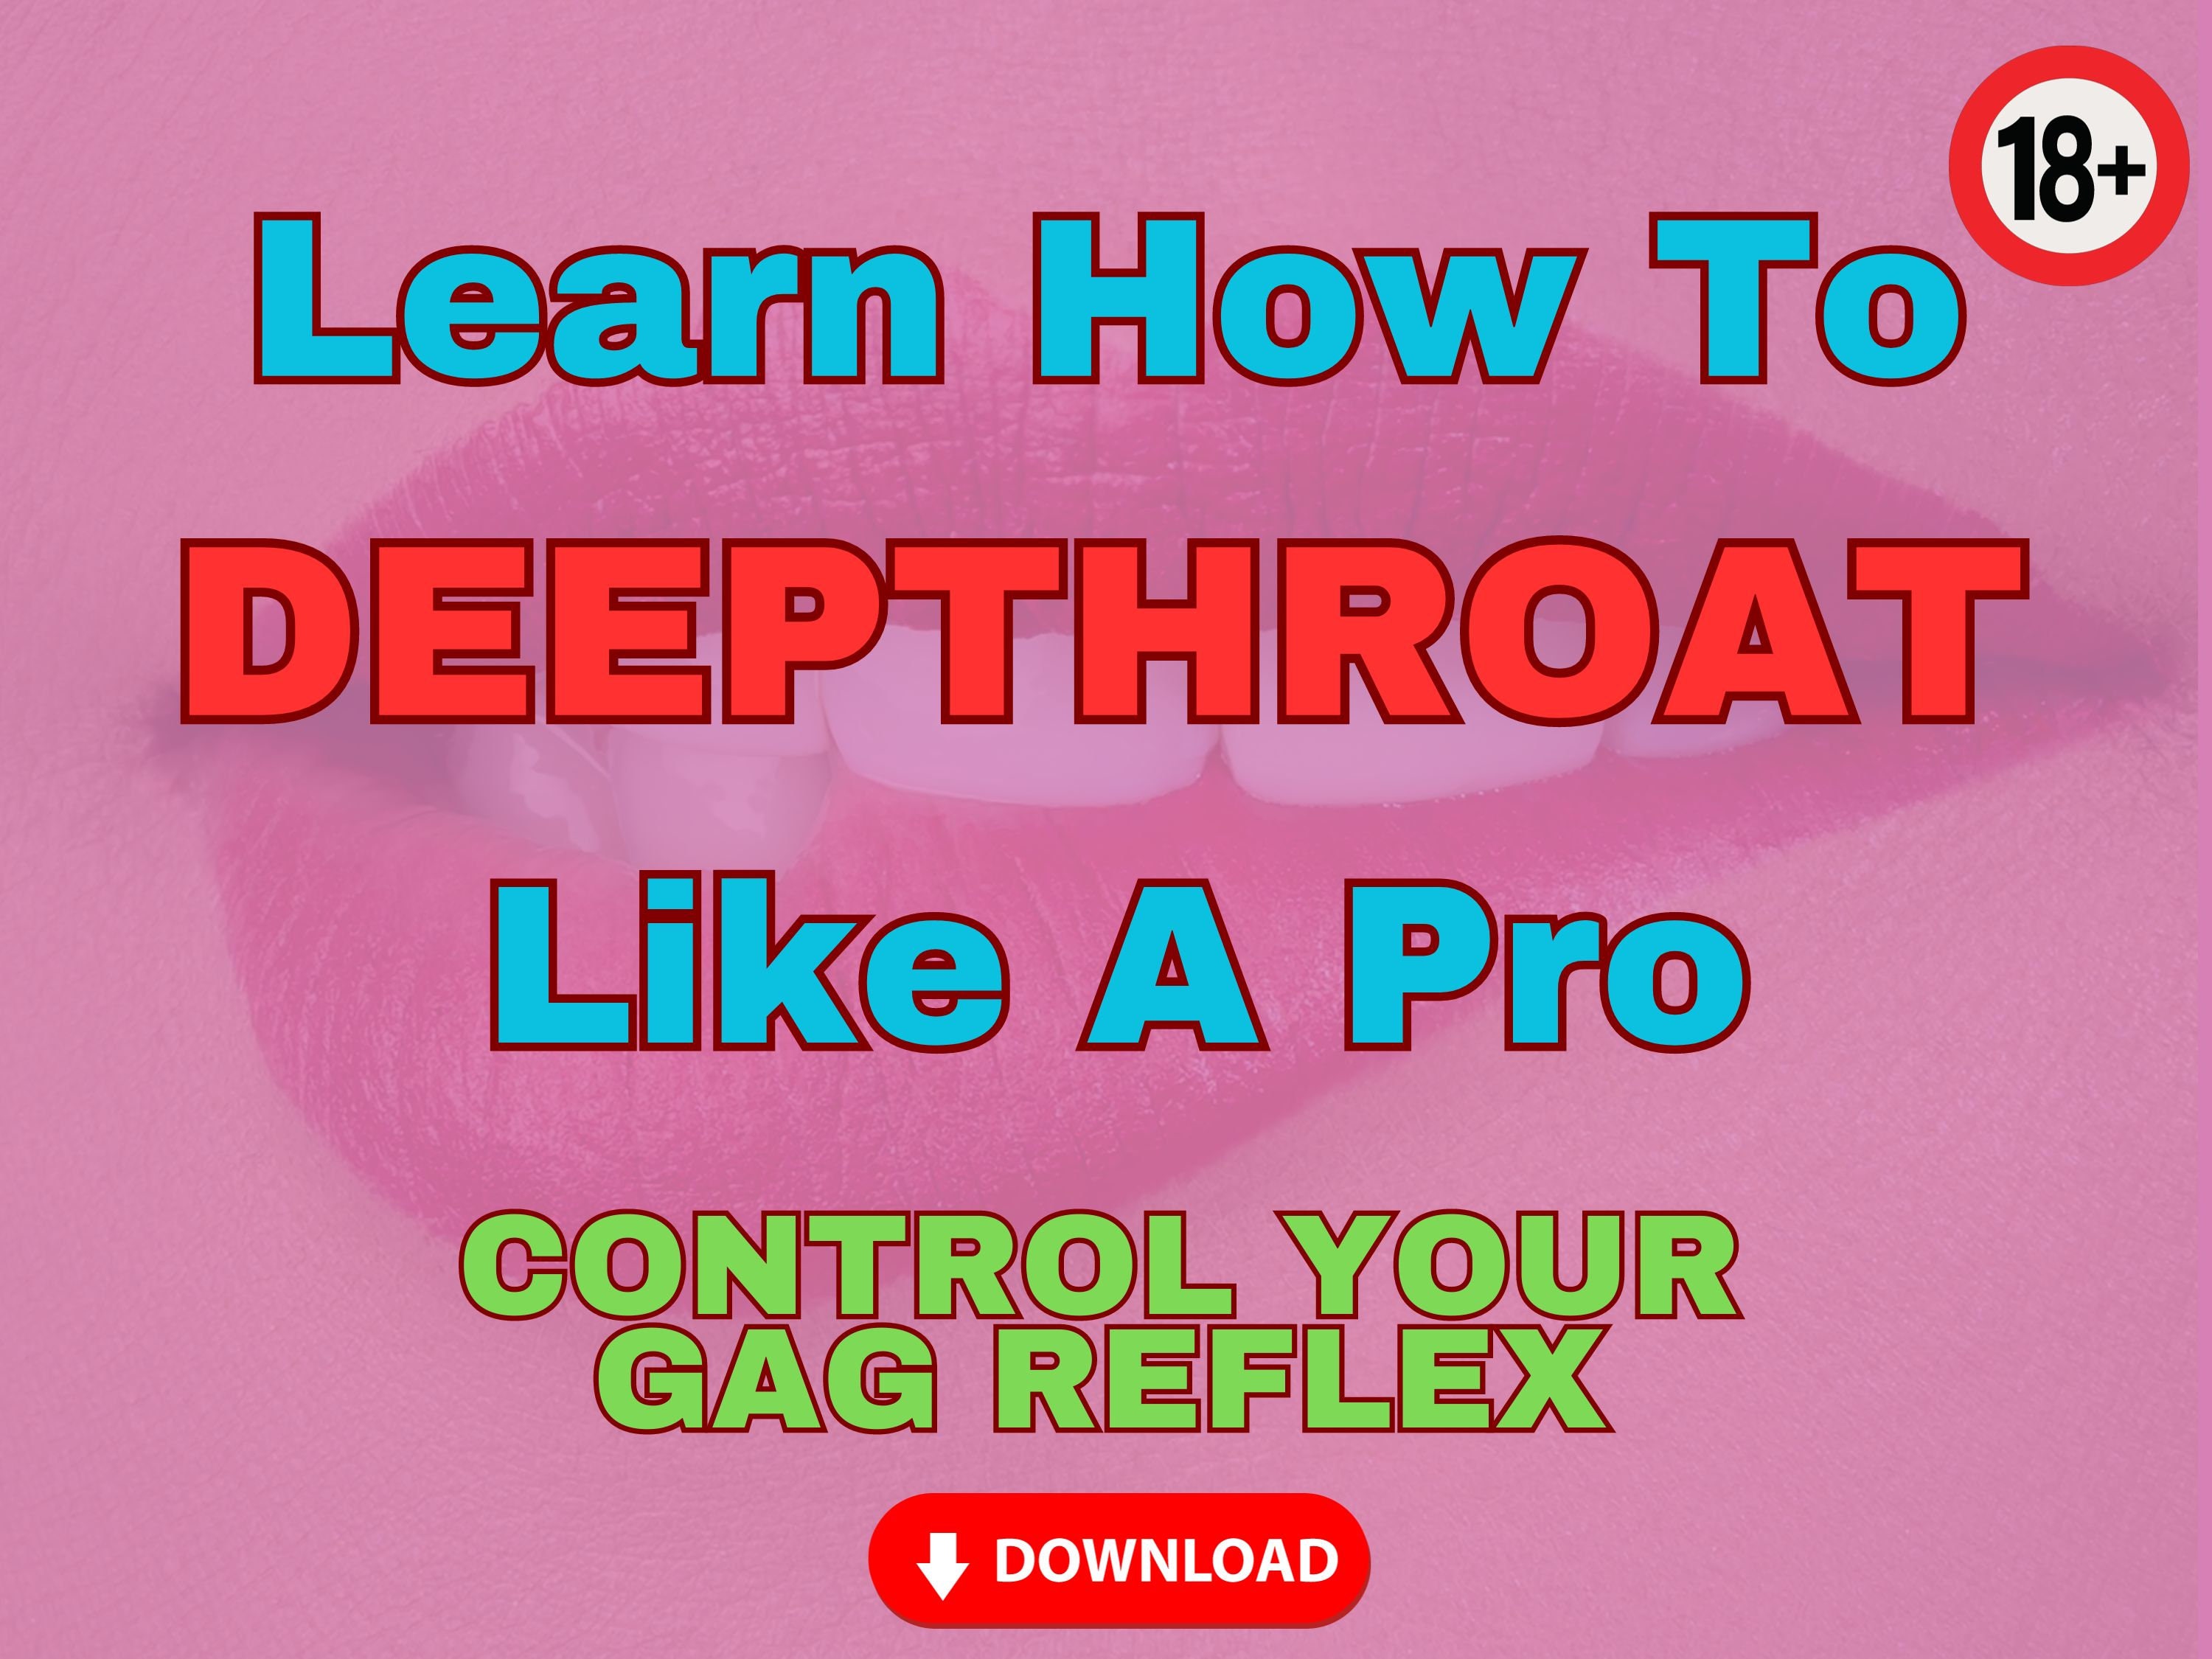 alexandra concannon recommends How To Deepthroat Like A Pro